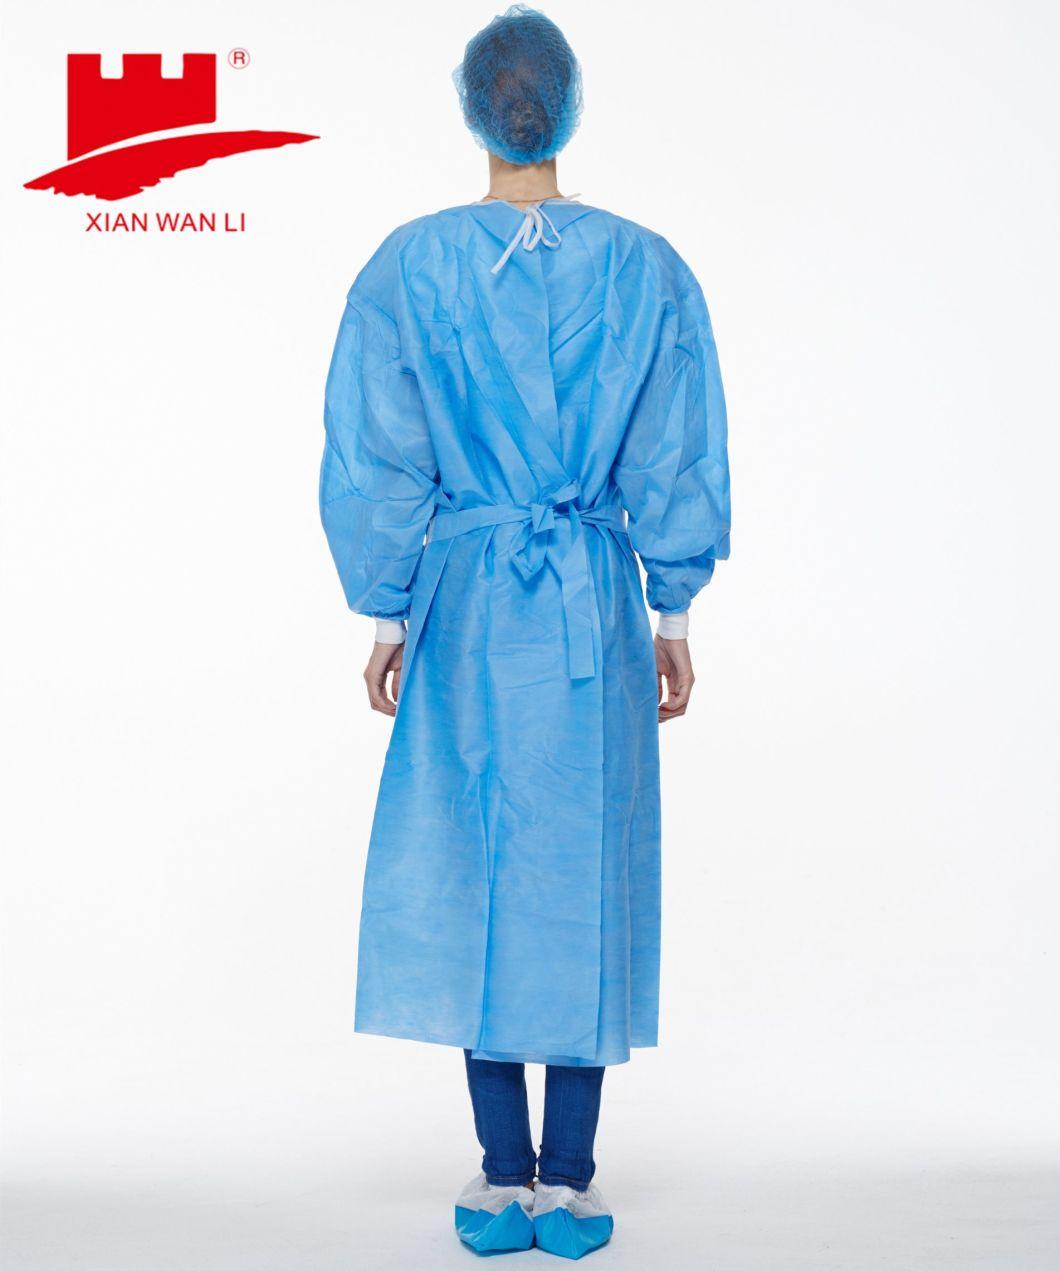 Level 2 Level 3 Level 4 Isolation Gown PPE Gowns SMS Medical Gowns Blue